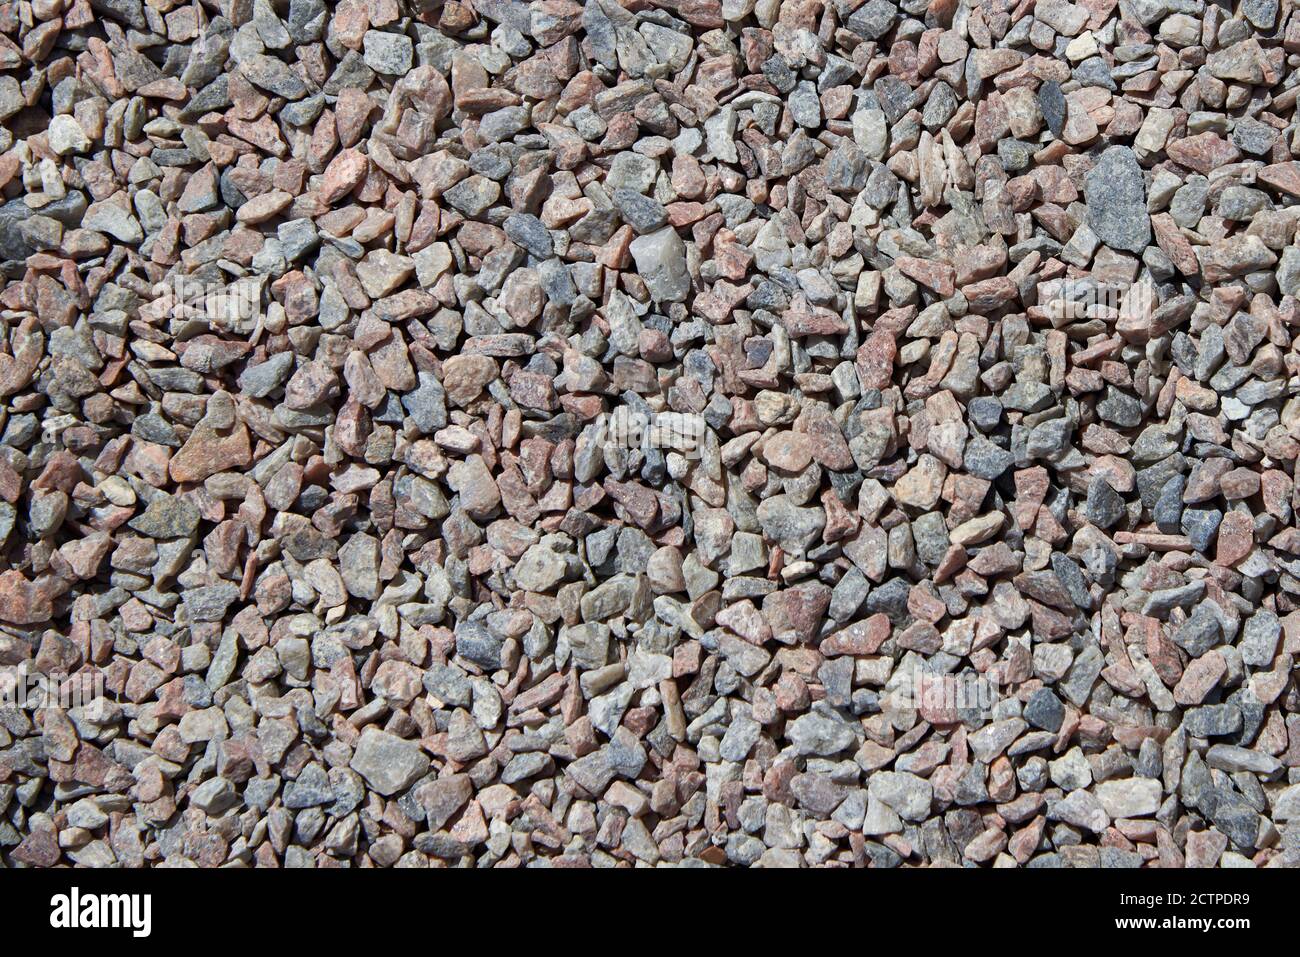 Crushed rock. Small rocks ground. Crushed stone road building